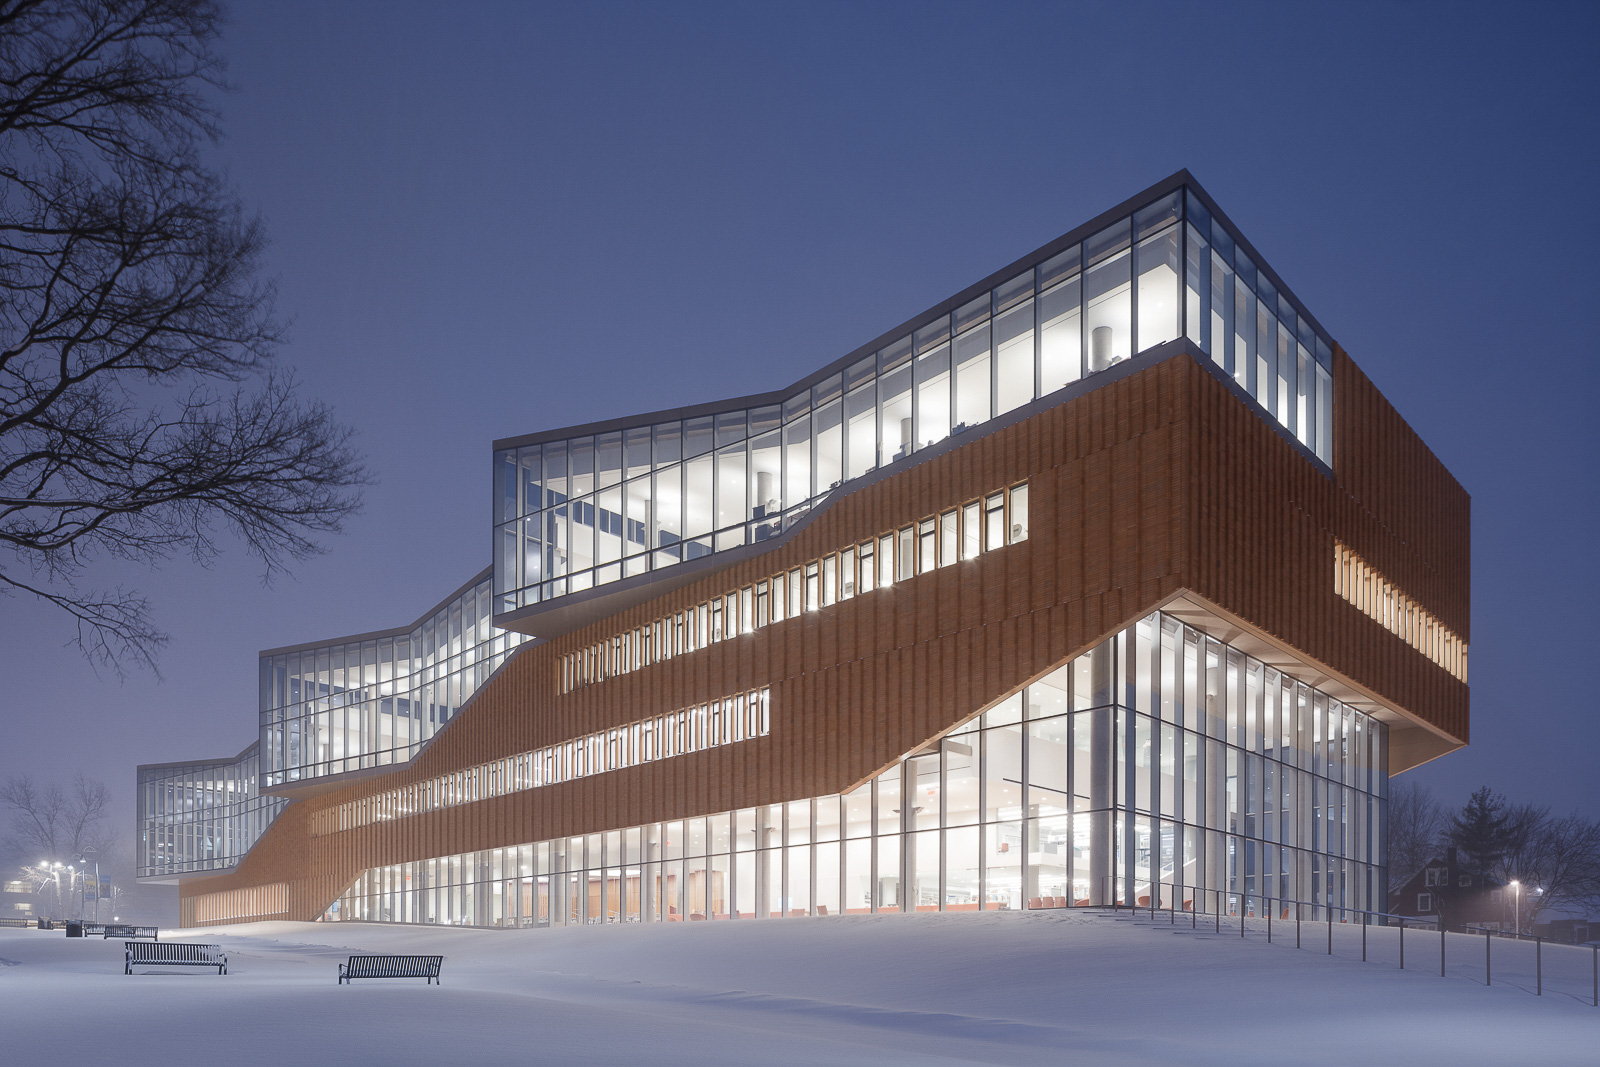 Kent State School of Architecture by Weiss/Manfredi photographed by Brad Feinknopf based in Columbus, Ohio